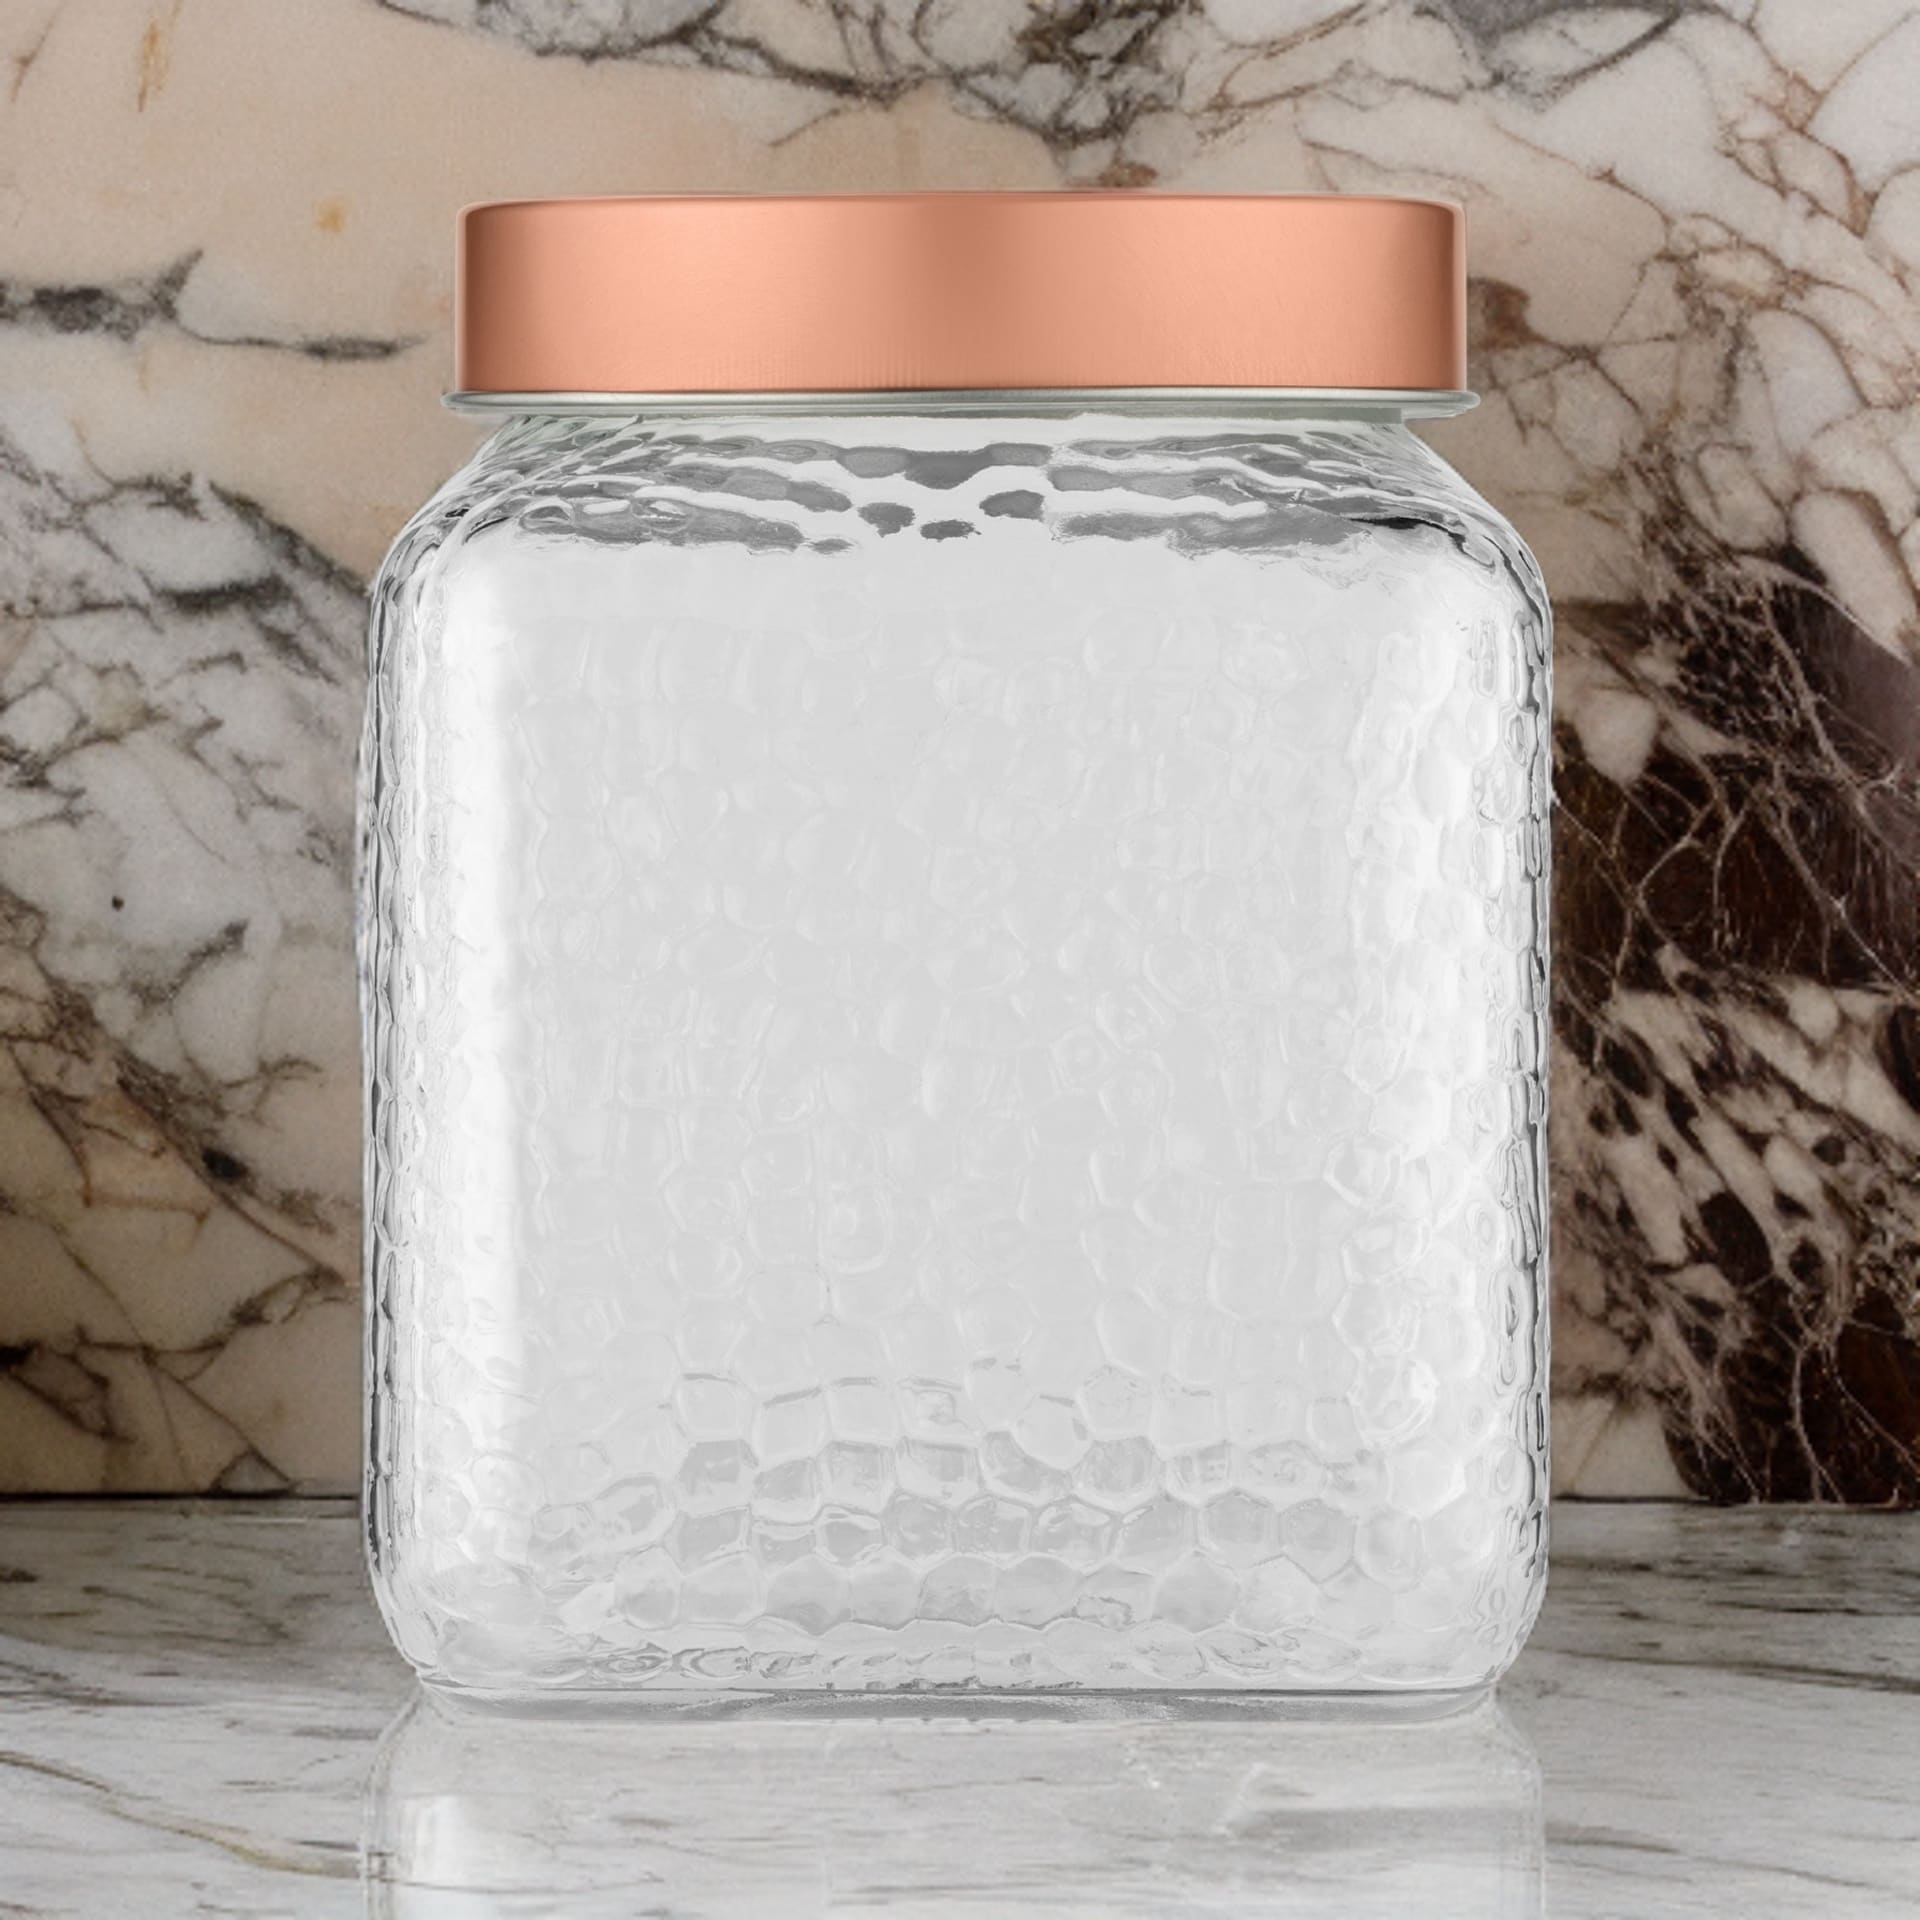  ZENS Glass Kitchen Canisters, 74 FL OZ Airtight Storage Jars  with Glass Lids, 4.7 Inch Wide Mouth Tall Container Set of 2 for Baking  Flour Sourdough or Snack,2200ml : Home & Kitchen